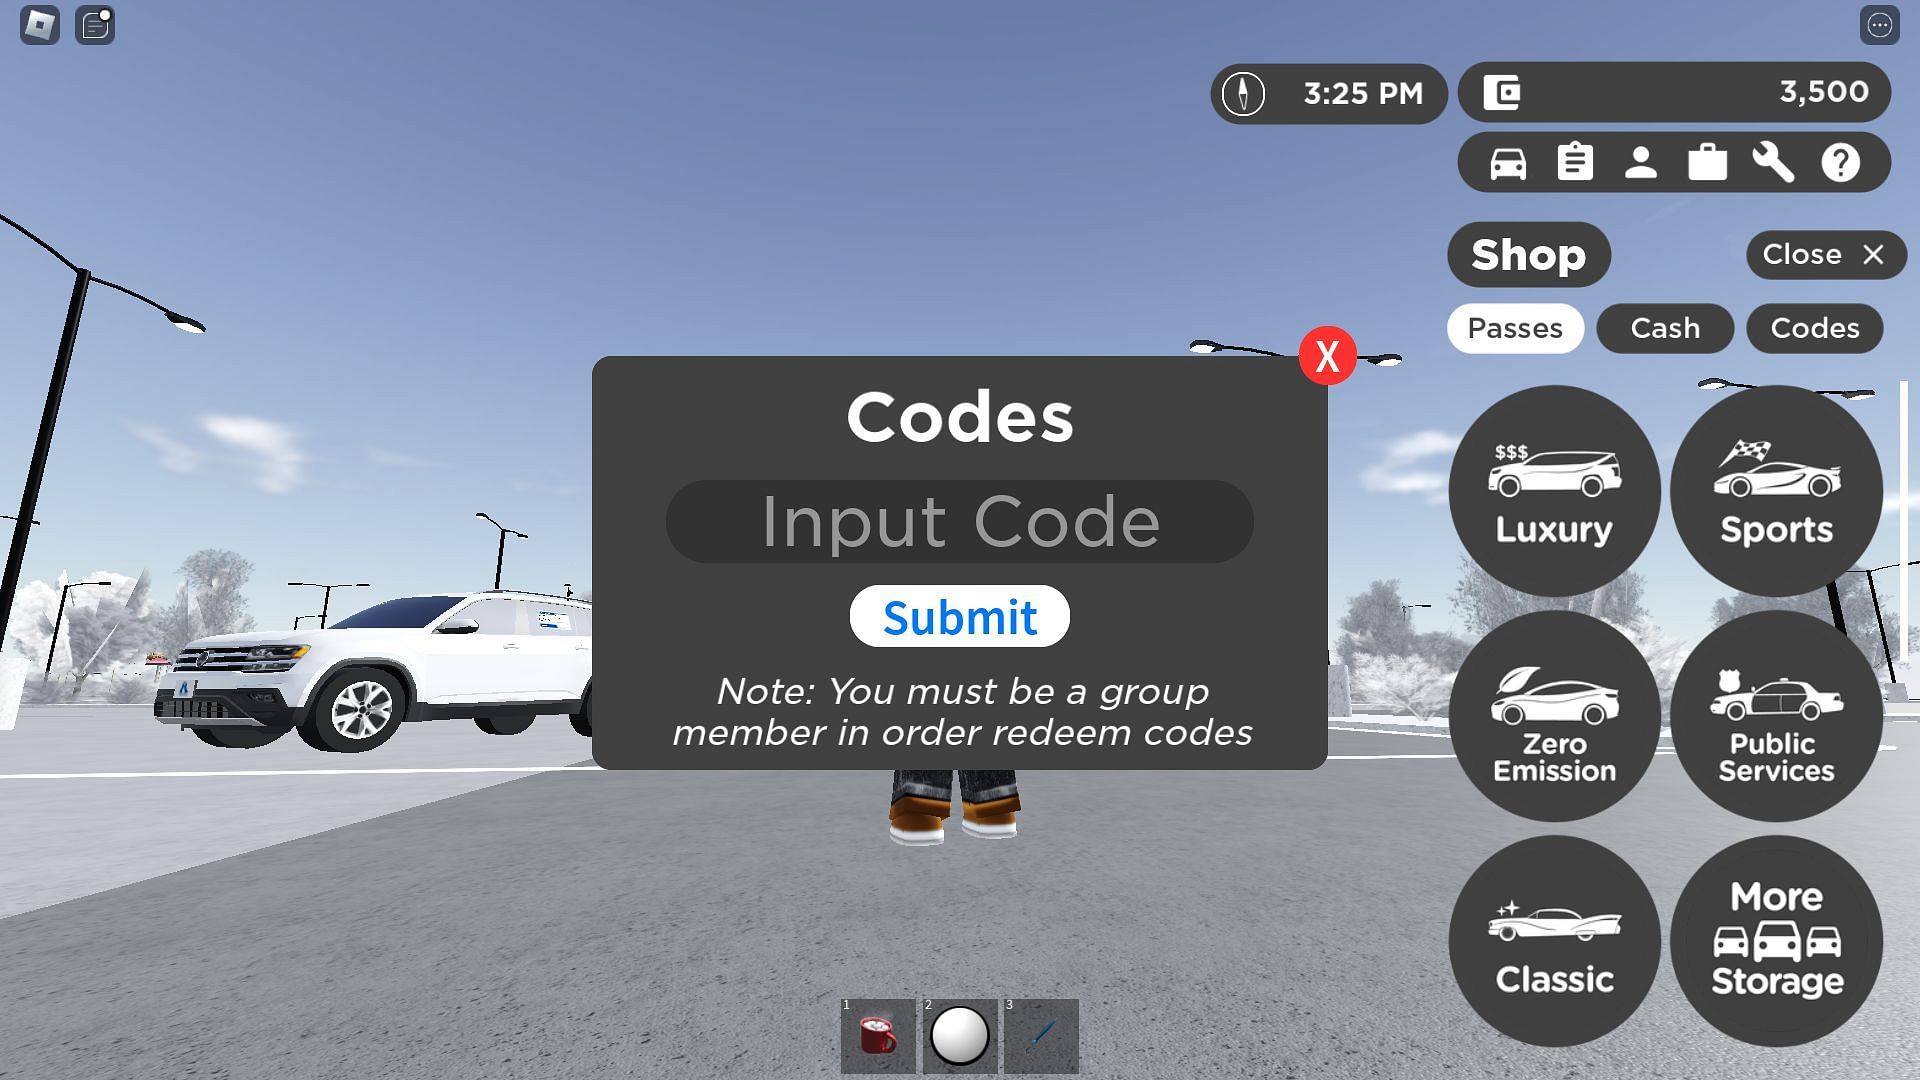 Active codes for Greenville (Image via Roblox)